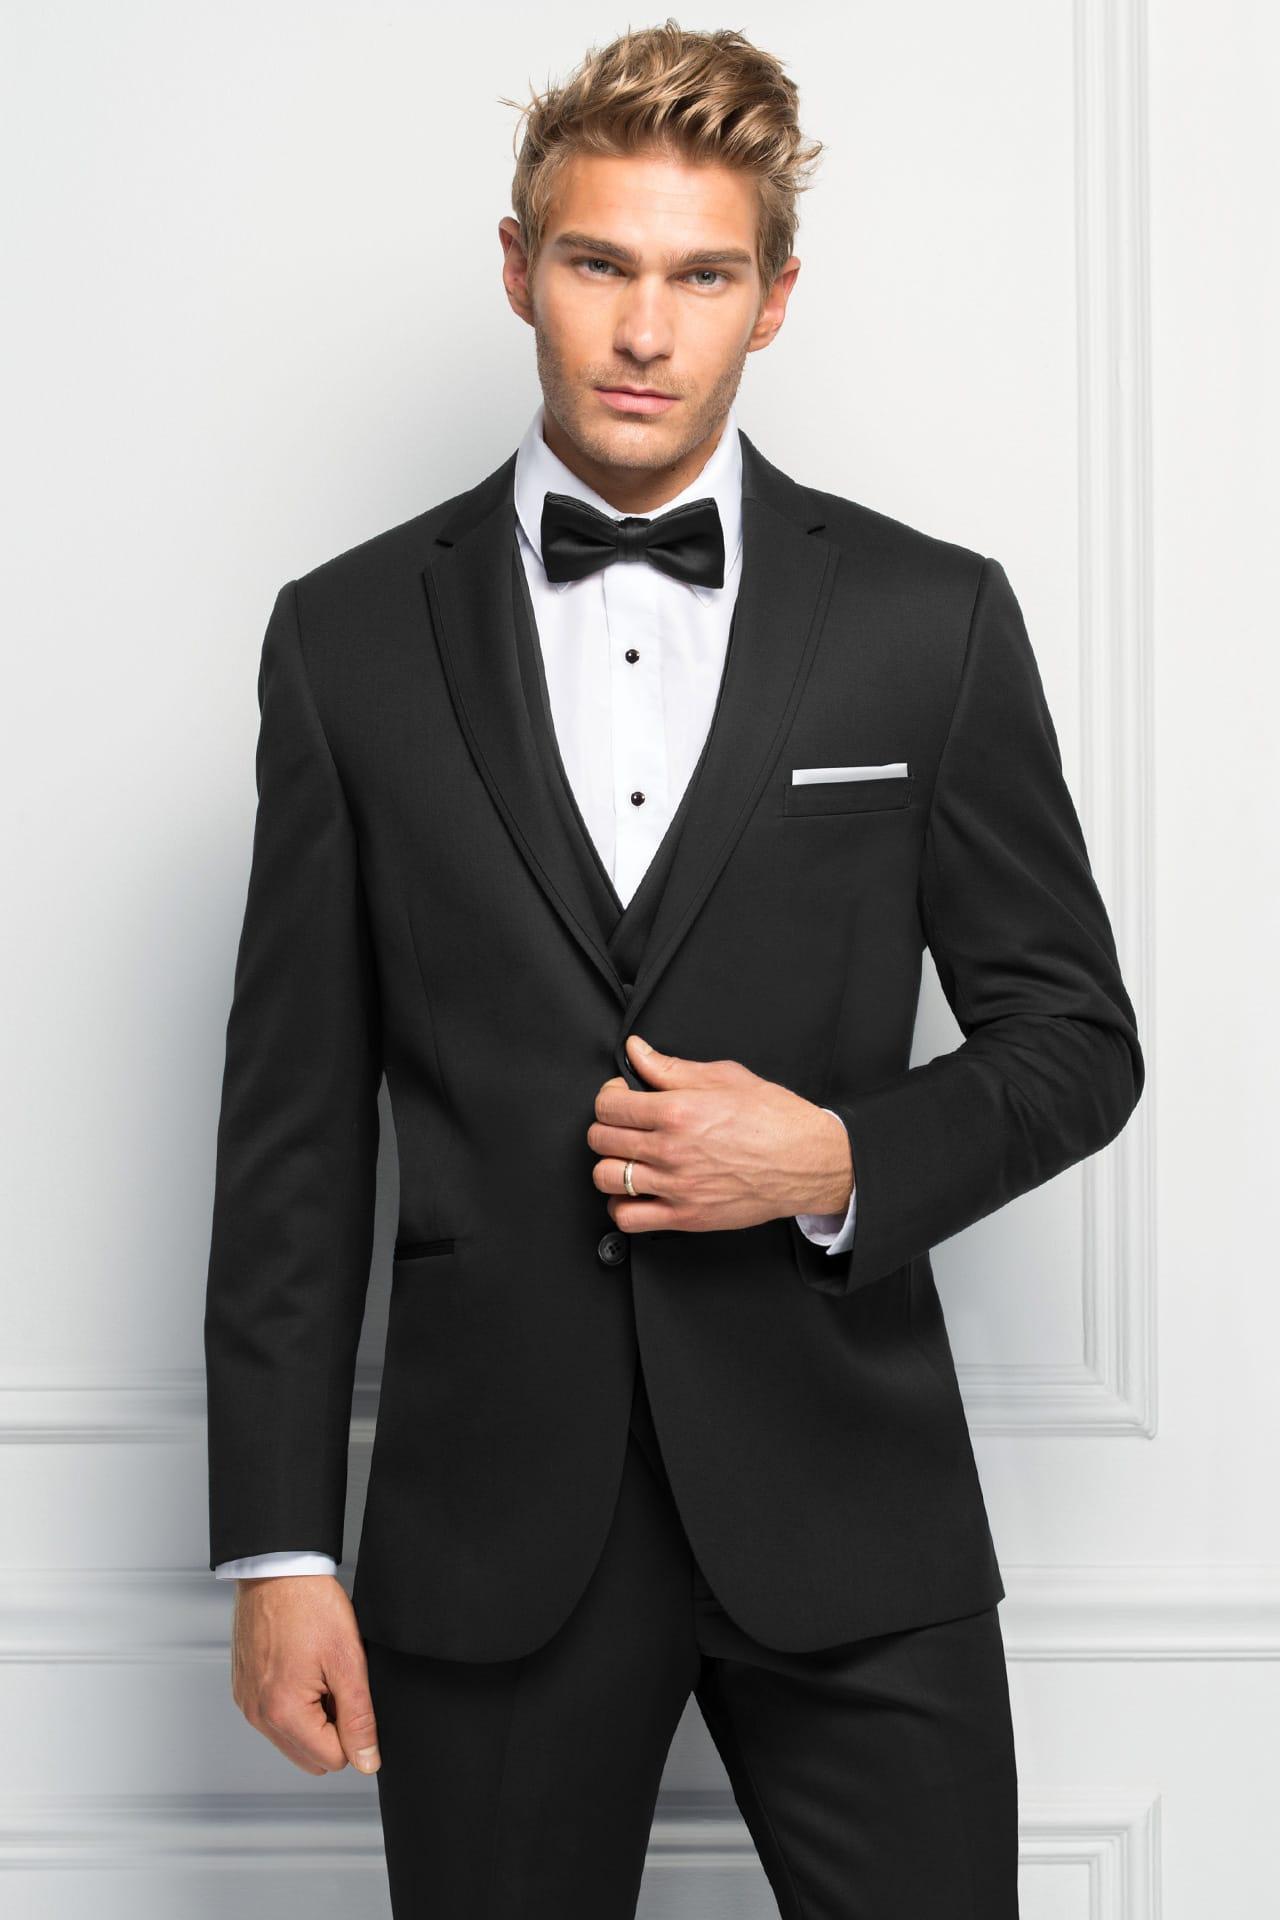 Choosing the Best Wedding Suit For the Groom for 2019